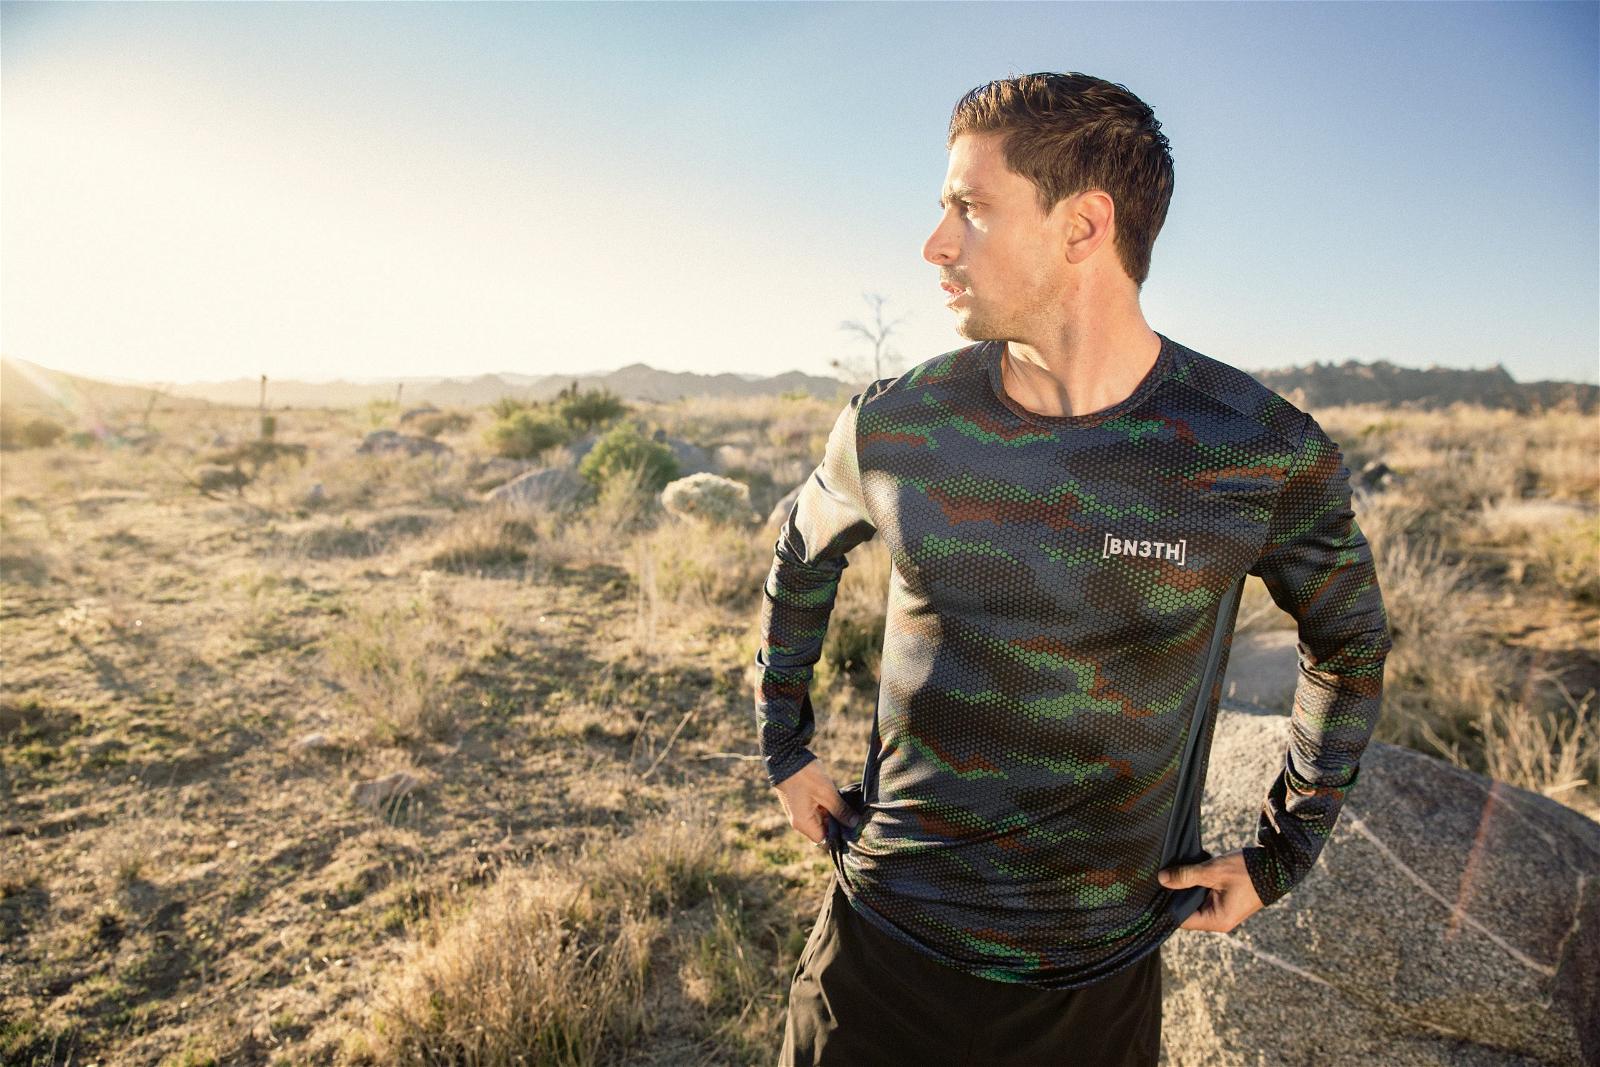 BN3TH Merino Wool Base Layers Review: They Will Keep You